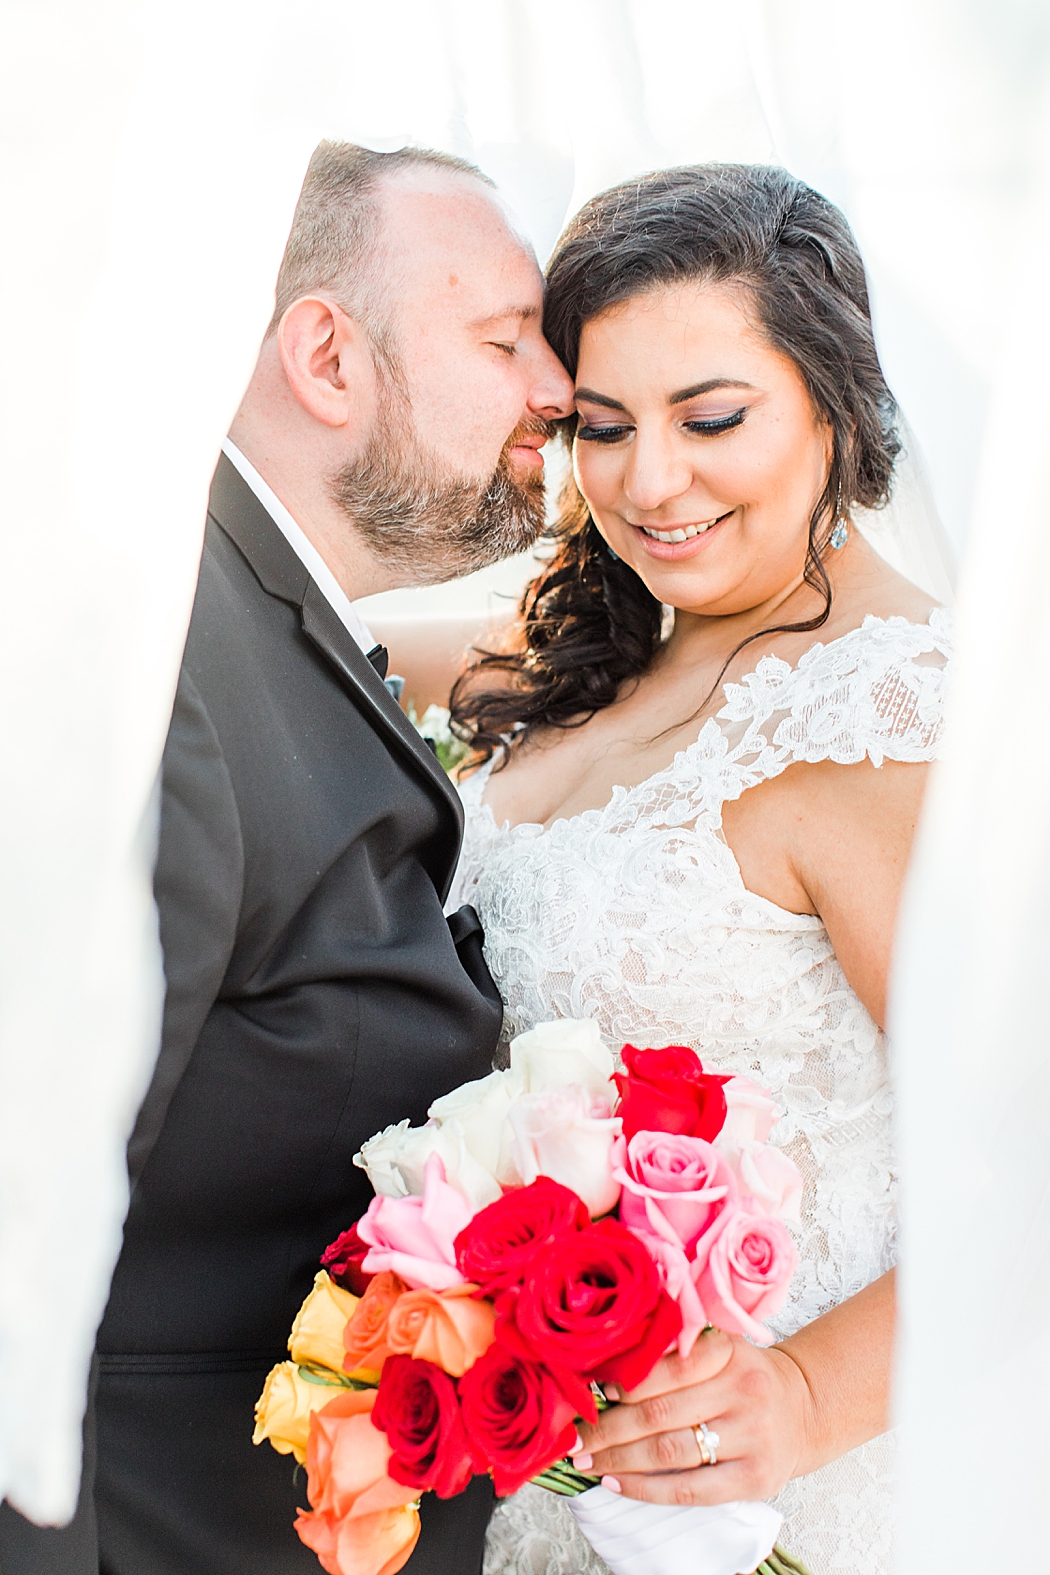 A Fiesta Themed wedding at Lost Mission in Spring Branch Texas by San Antonio Photographer Allison Jeffers Photography 0115